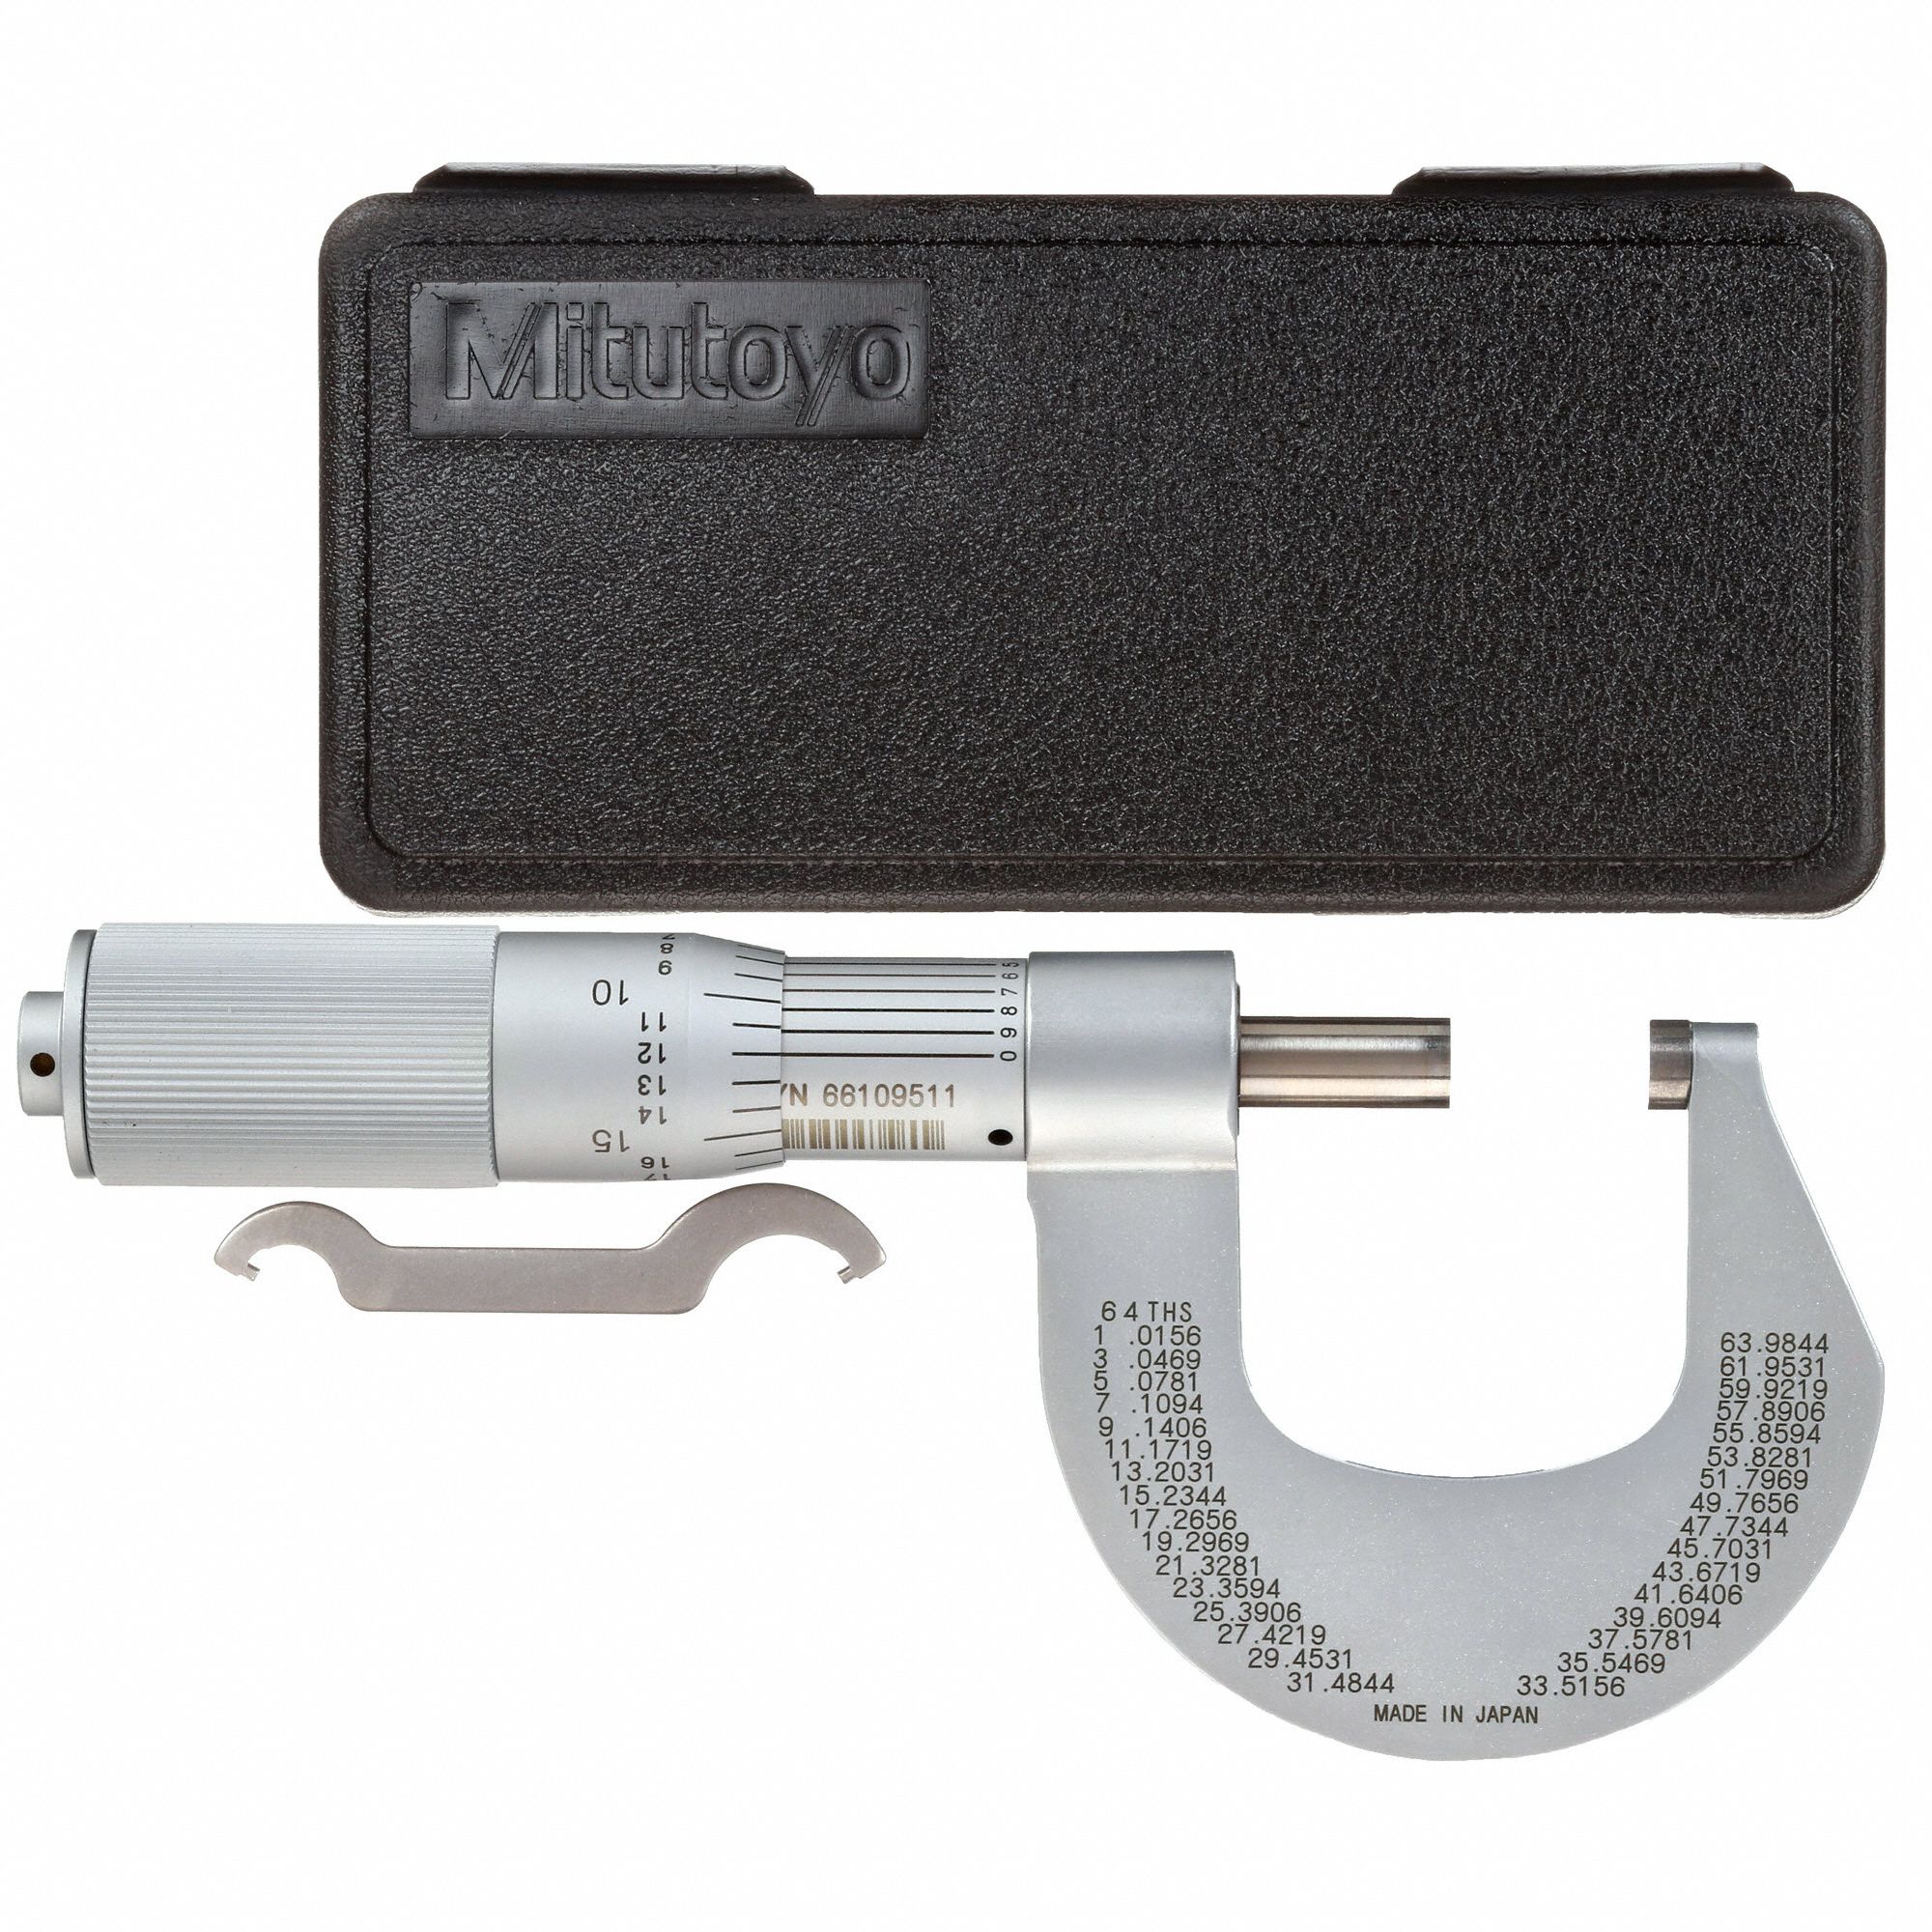 0.00005 0-1 Mitutoyo 293-330 Digimatic Outside Micrometer Range 0.001mm Inch/Metric +/-.00005 Accuracy Ratchet Stop Resolution Meets IP65 Specifications 0-25.4mm 